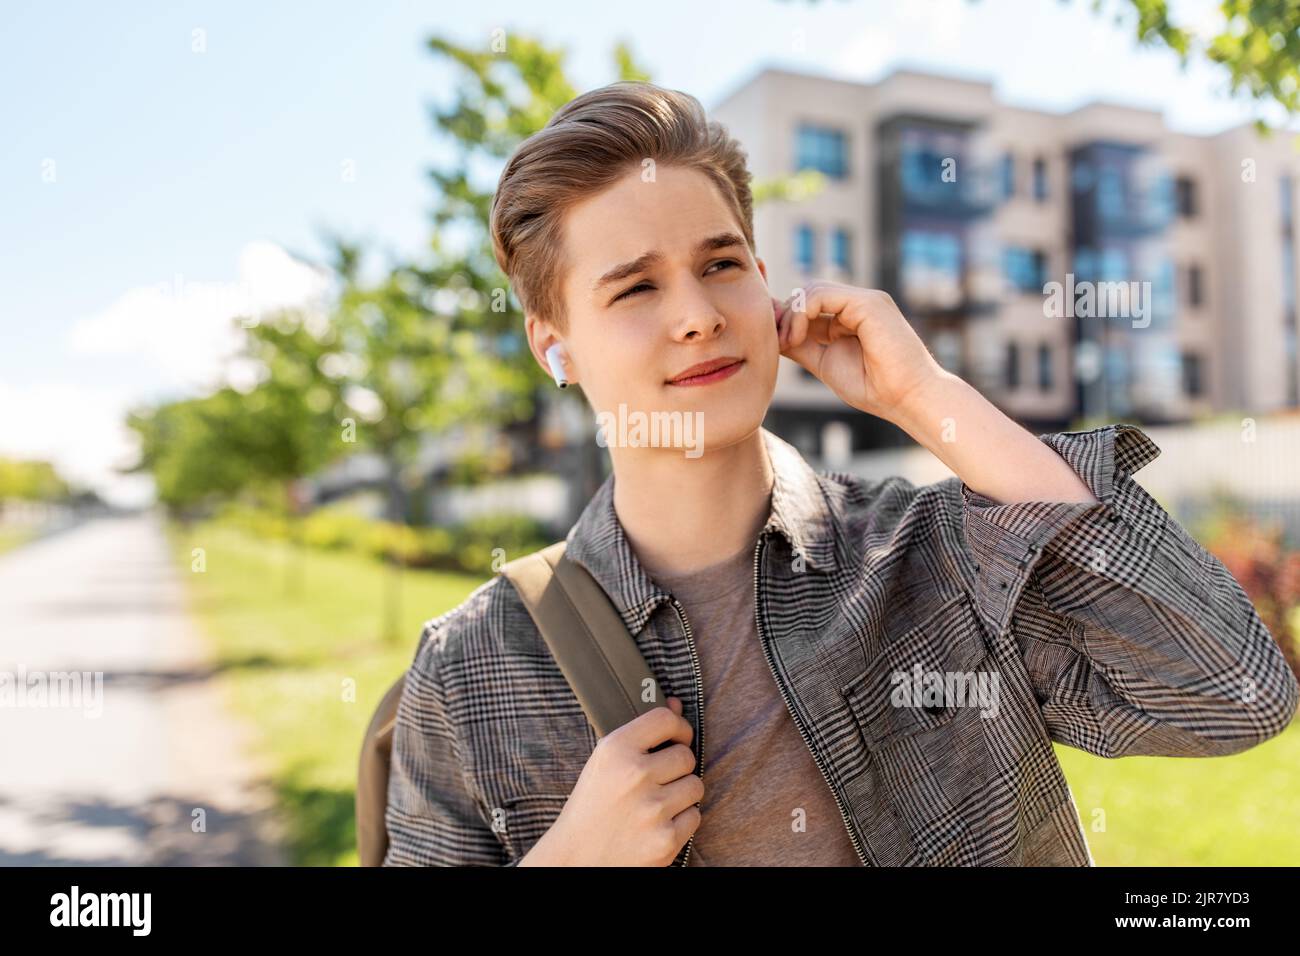 young man with earphones and backpack in city Stock Photo